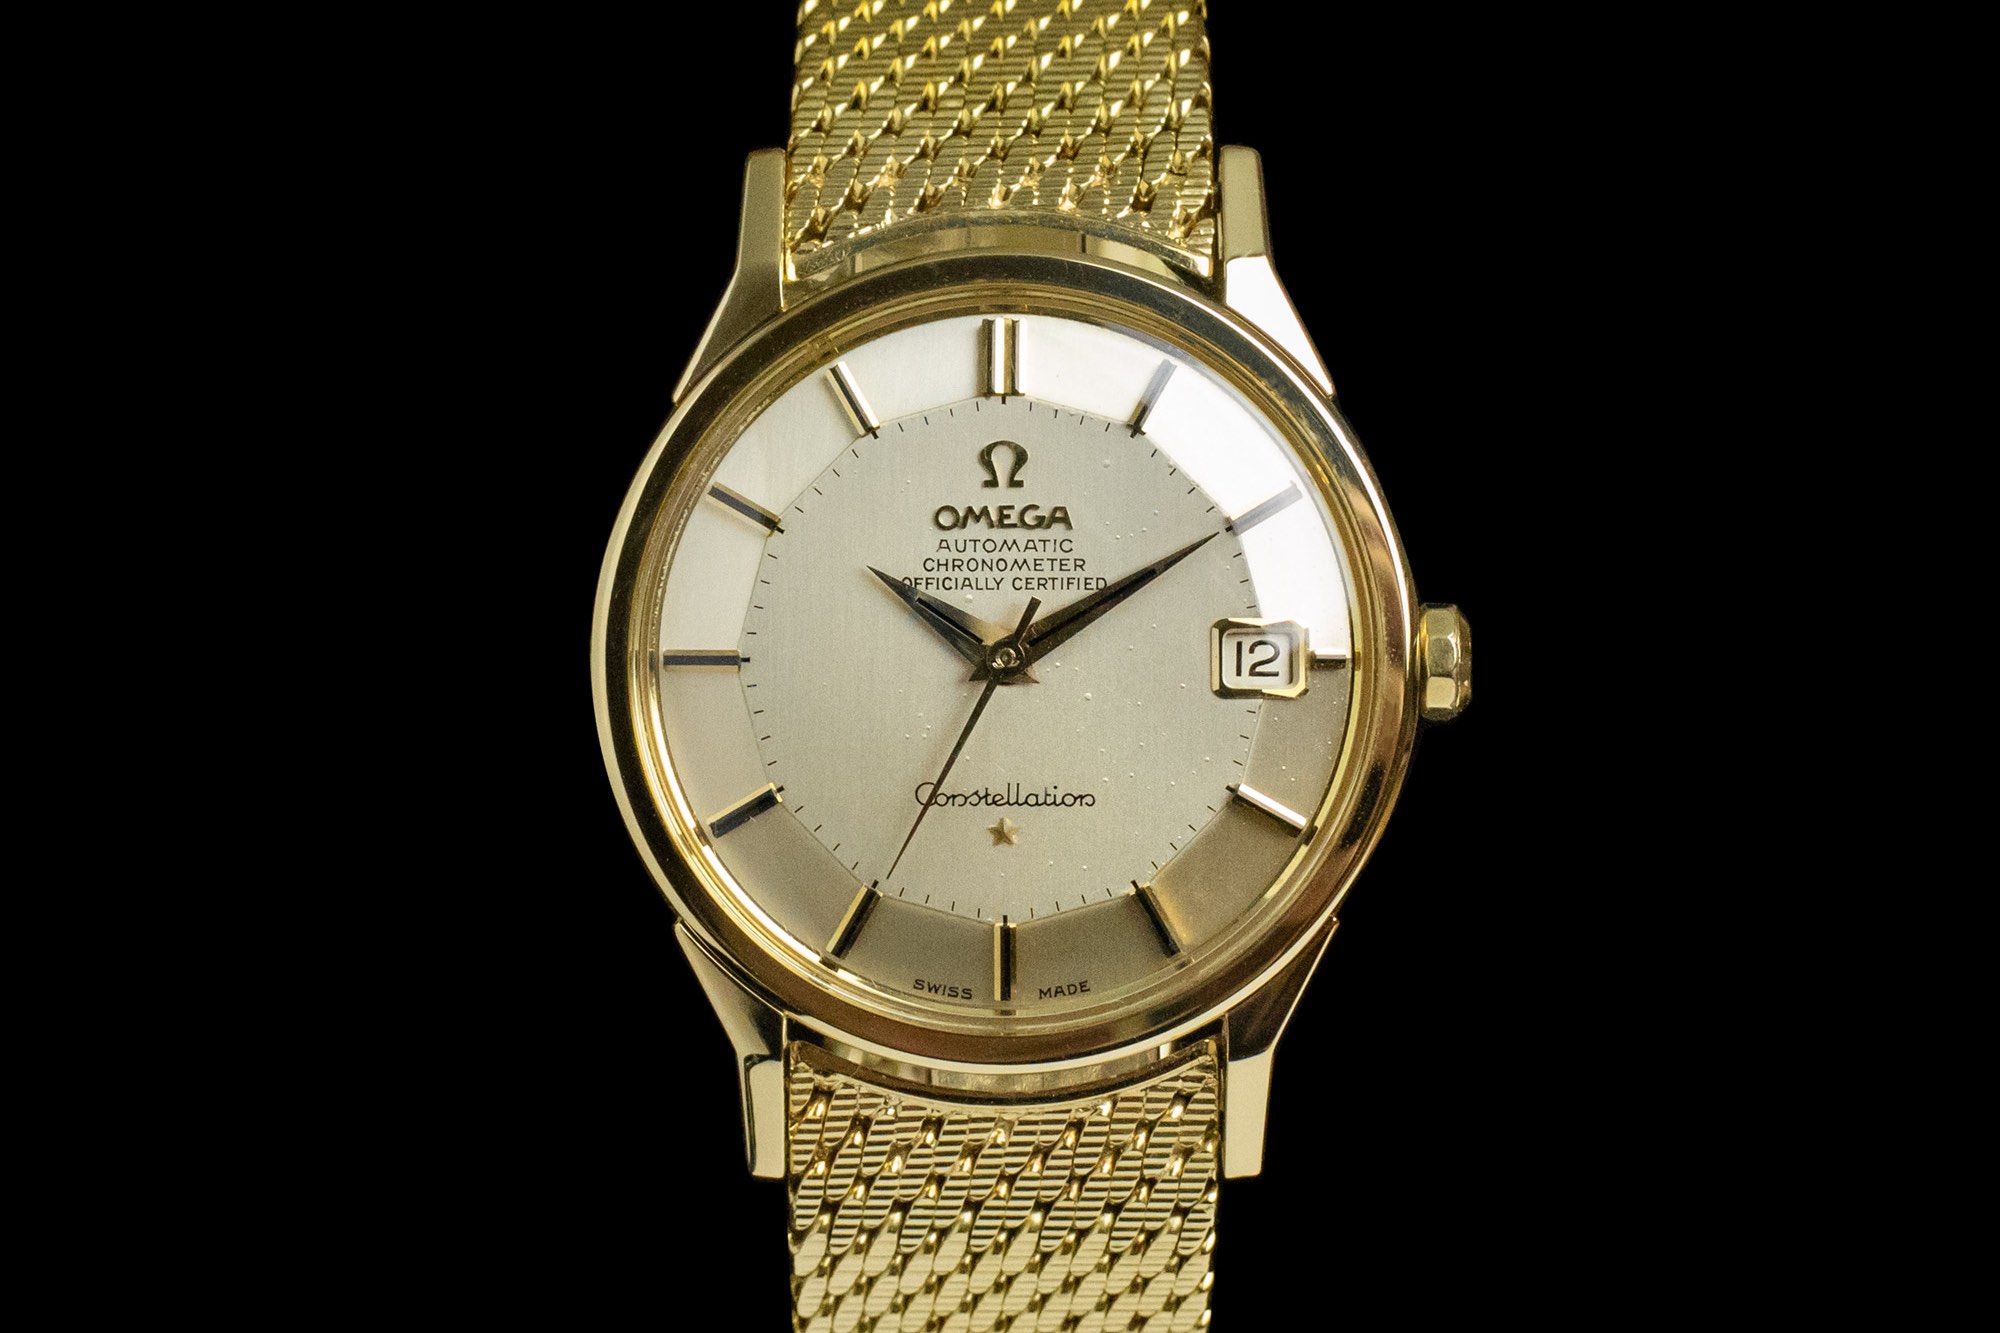 Commandant Minst jam The History of the Omega Constellation Collection - In-Depth